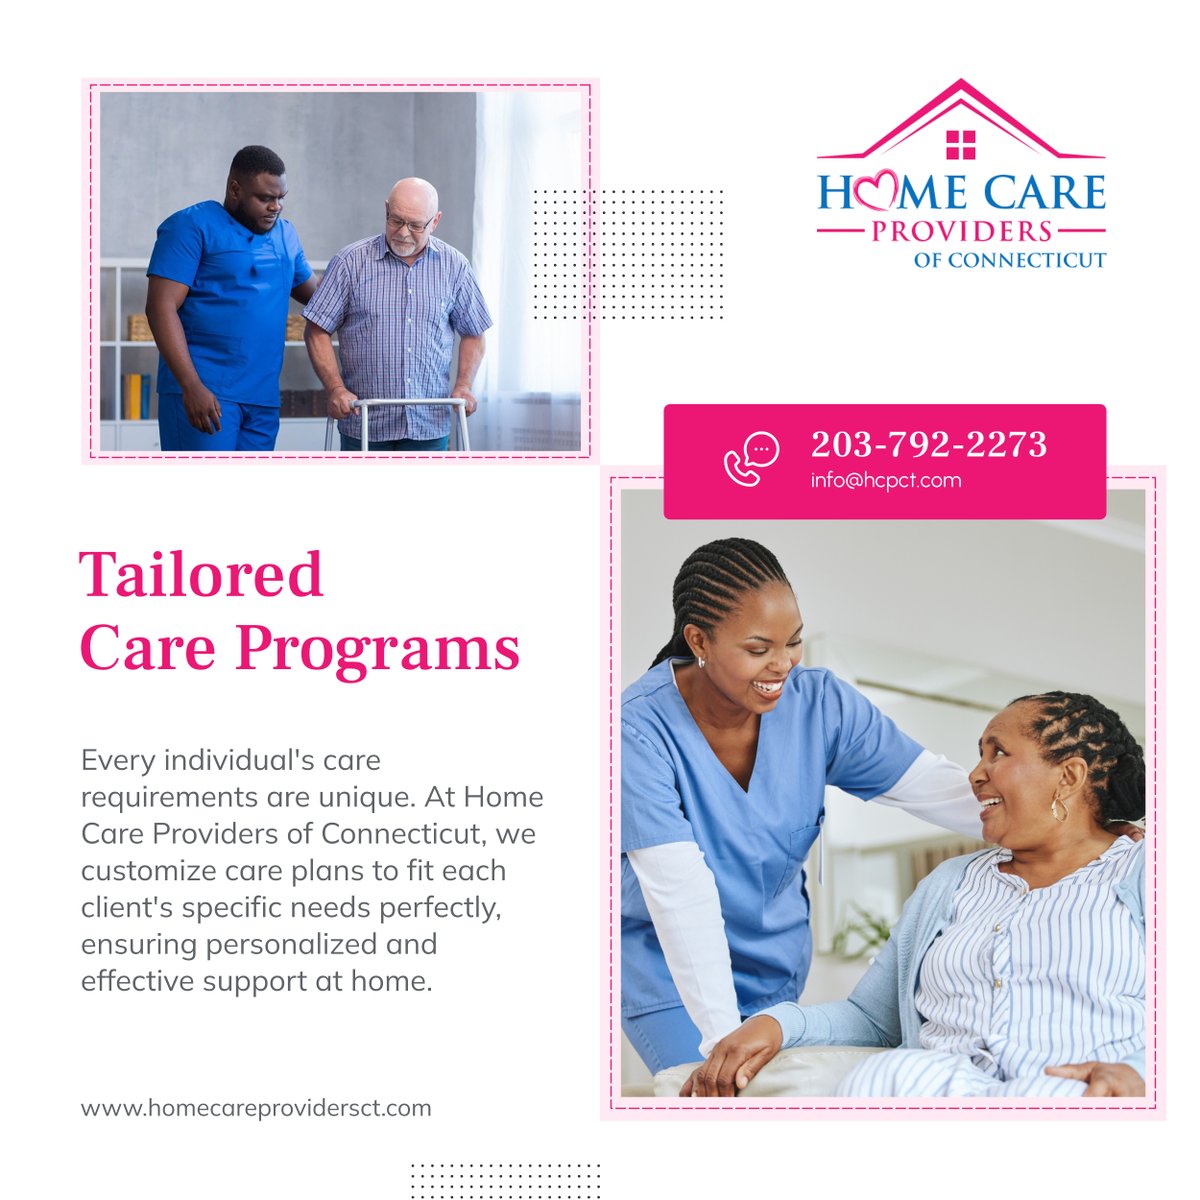 Experience care that's as unique as you are. Our personalized care programs are designed to meet your individual needs, promoting independence and well-being. #BethelCT #HomeCare #PersonalizedCare #IndividualNeeds #SupportServices